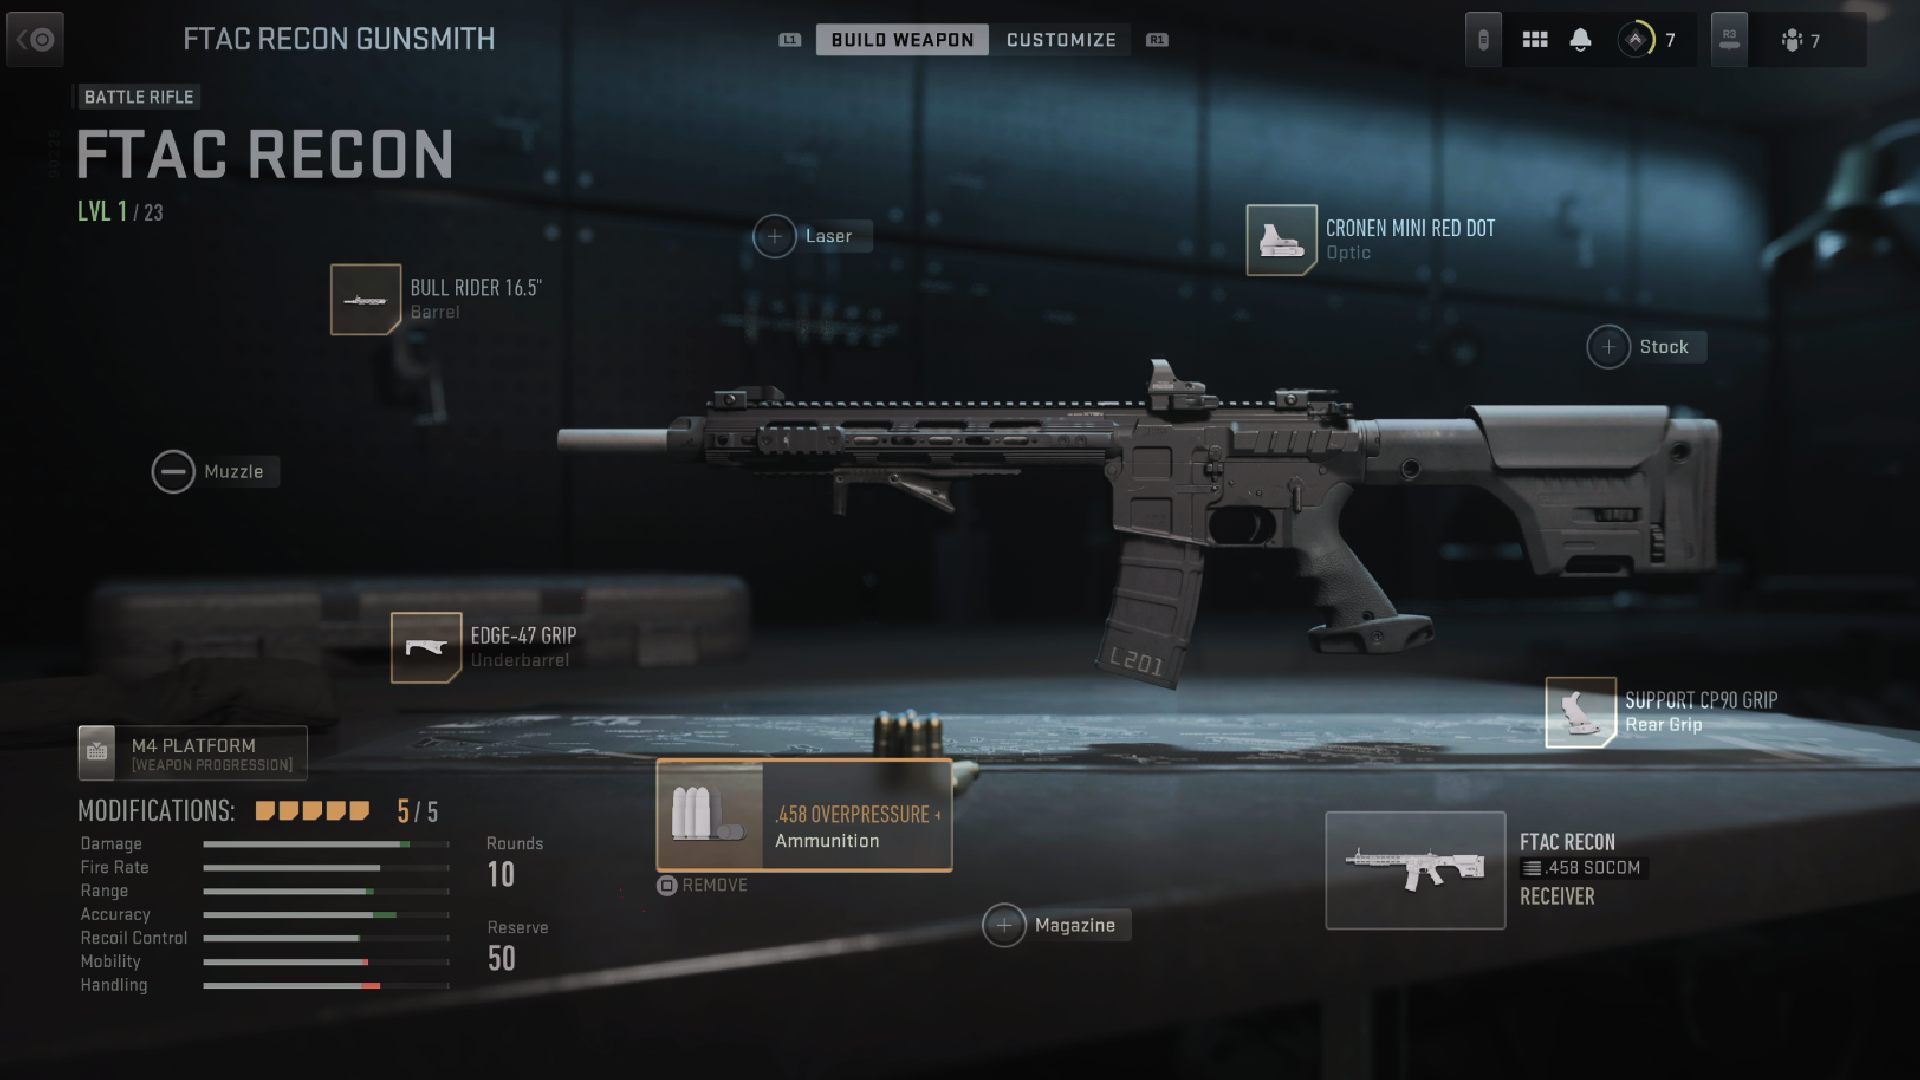 Best Modern Warfare FTAC Recon Loadout: The FTAC Recon can be seen